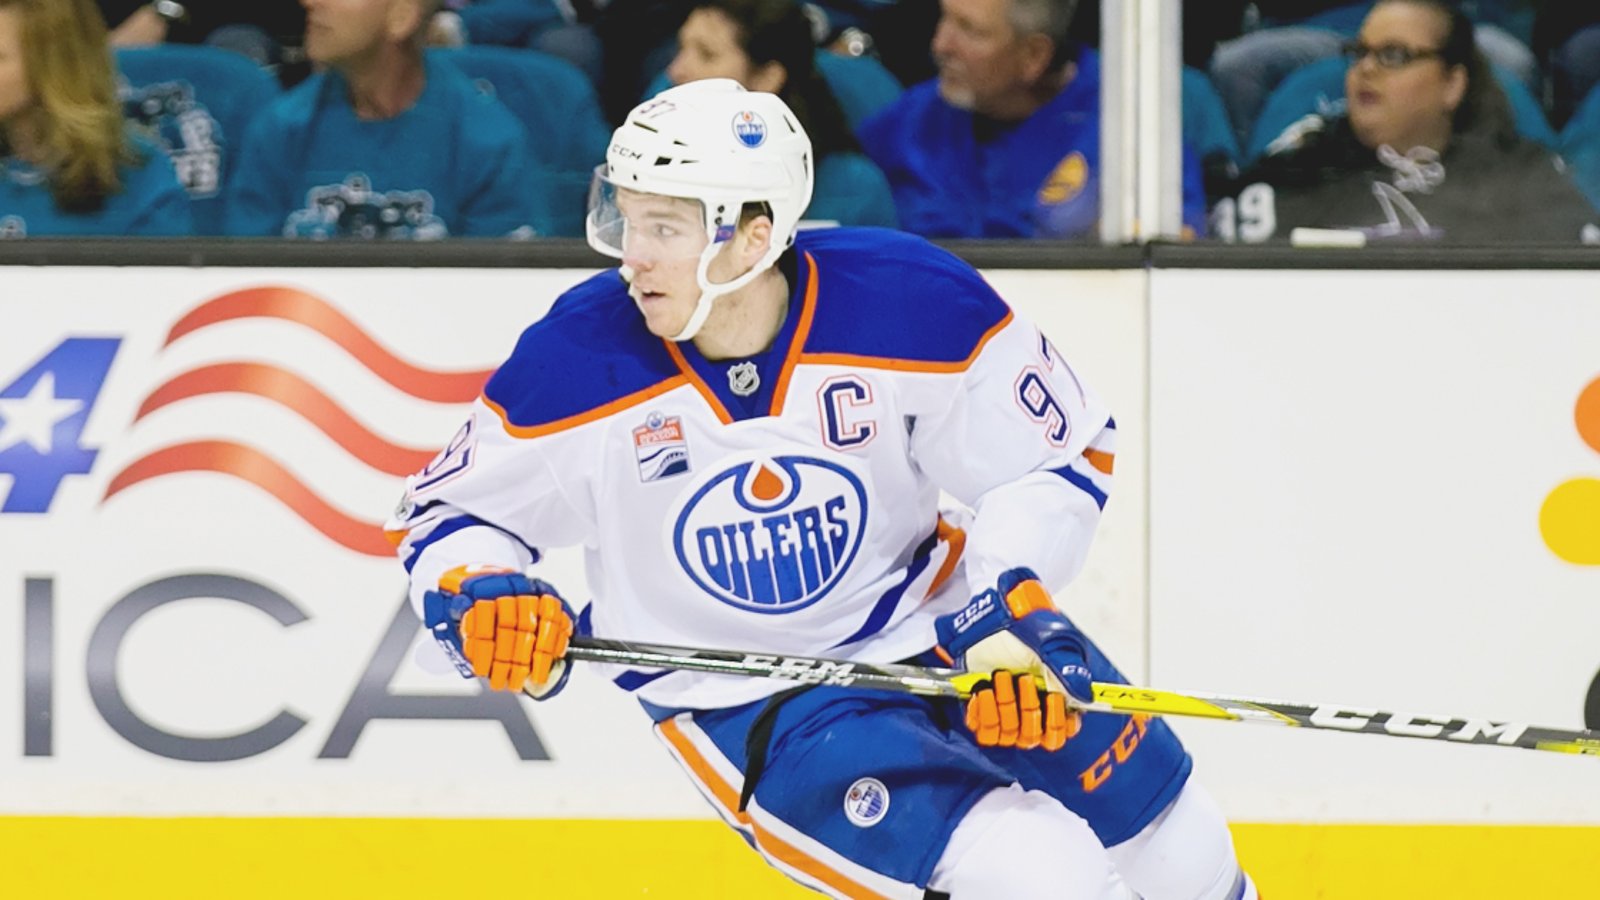 Frederick Andersen expects Edmonton Oilers SUPERSTAR Connor McDavid will be rocked.